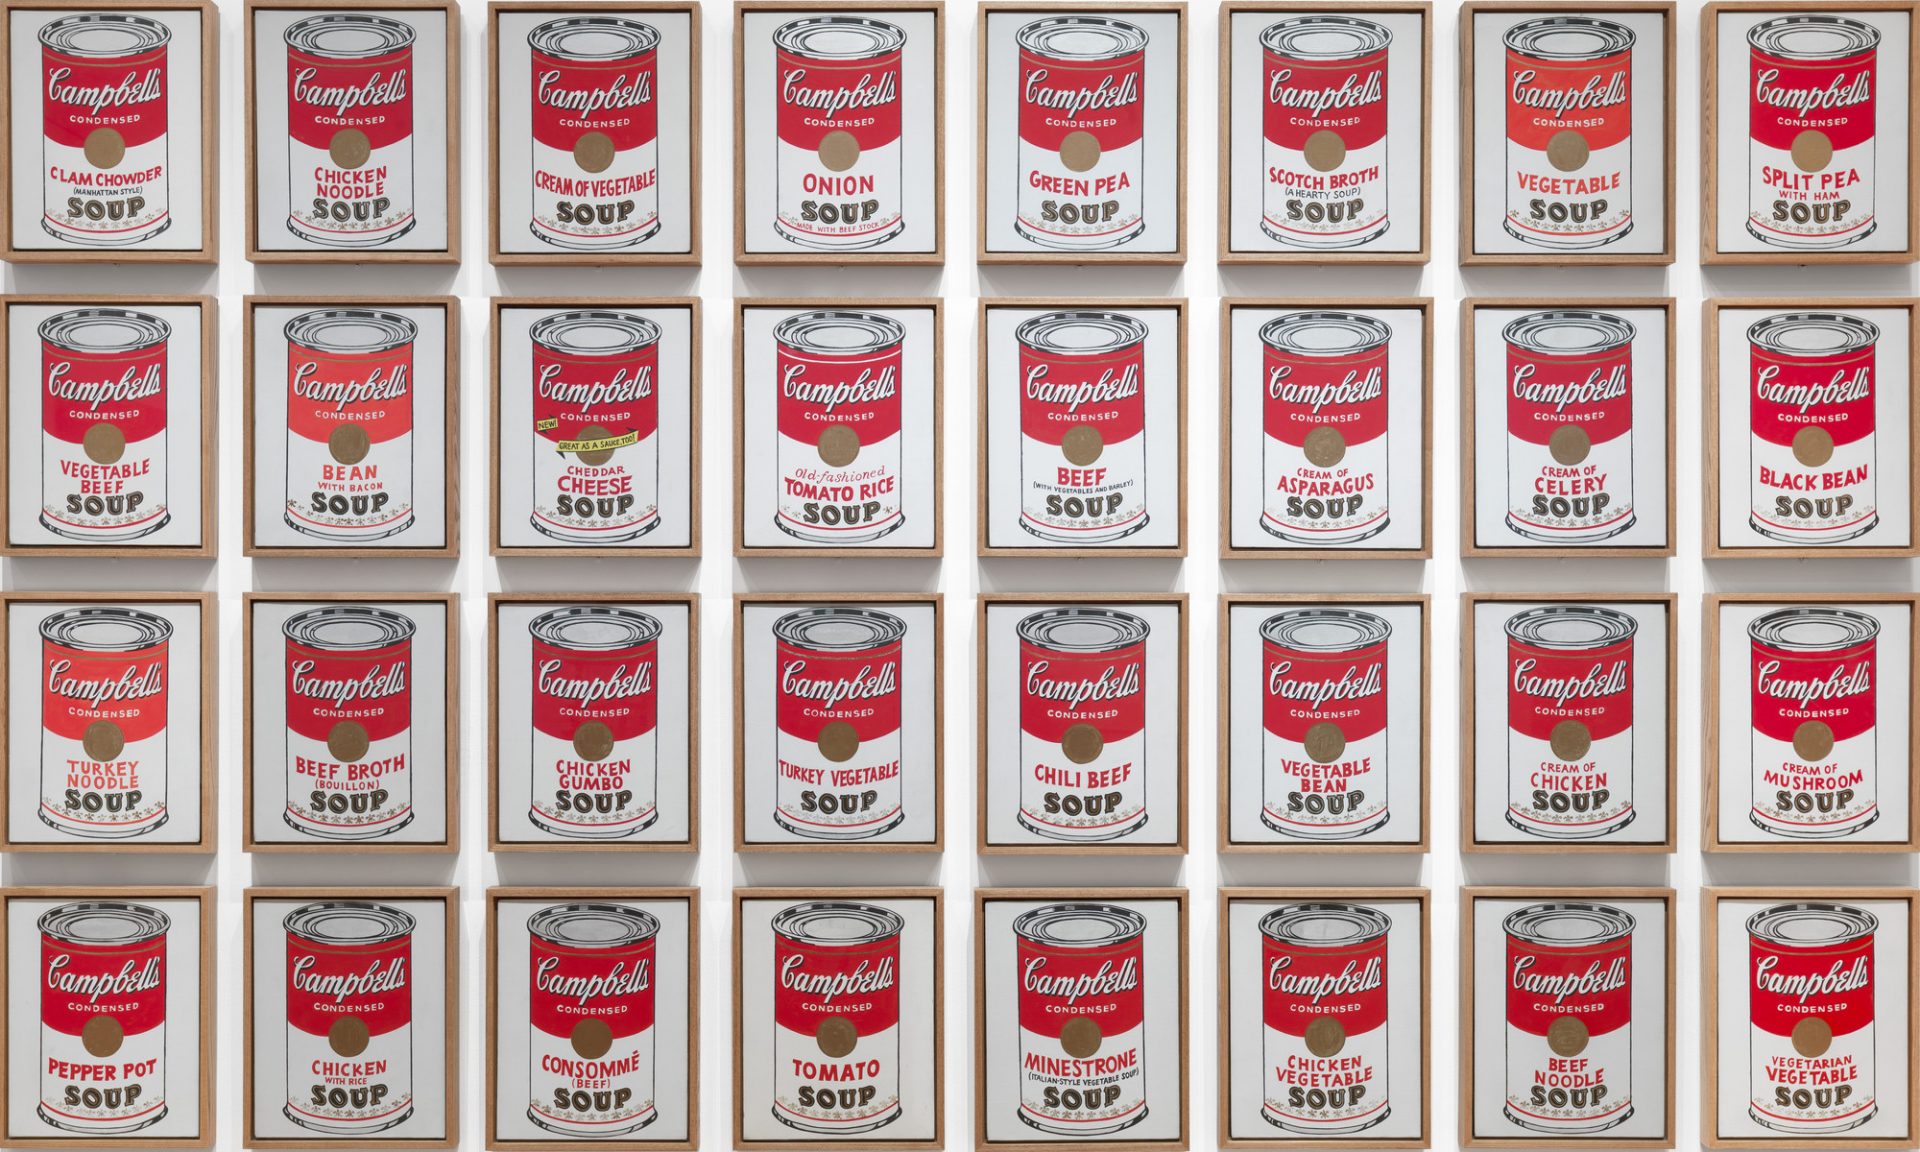 An array of 32 canvases, each featuring a different variety of Campbell's Soup cans. Each can is meticulously portrayed in red, white, and gold, mirroring the iconic packaging. Created by pop art pioneer Andy Warhol in 1962, this artwork showcases his exploration of consumerism and mass production.